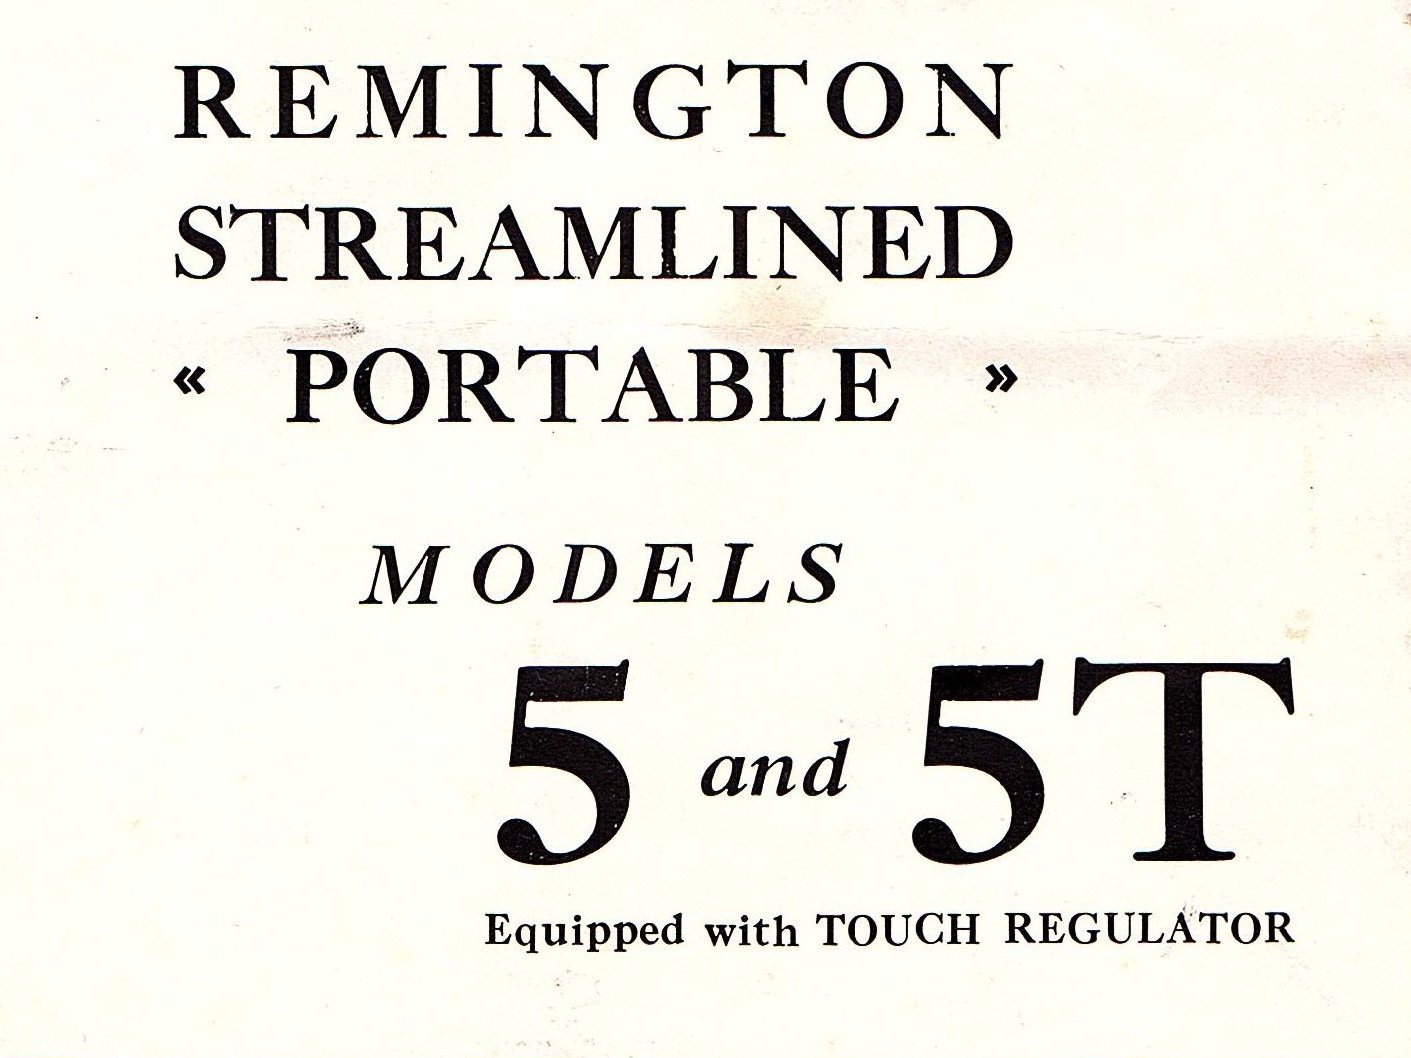 Remington Streamlined Portable Models 5 and 5T